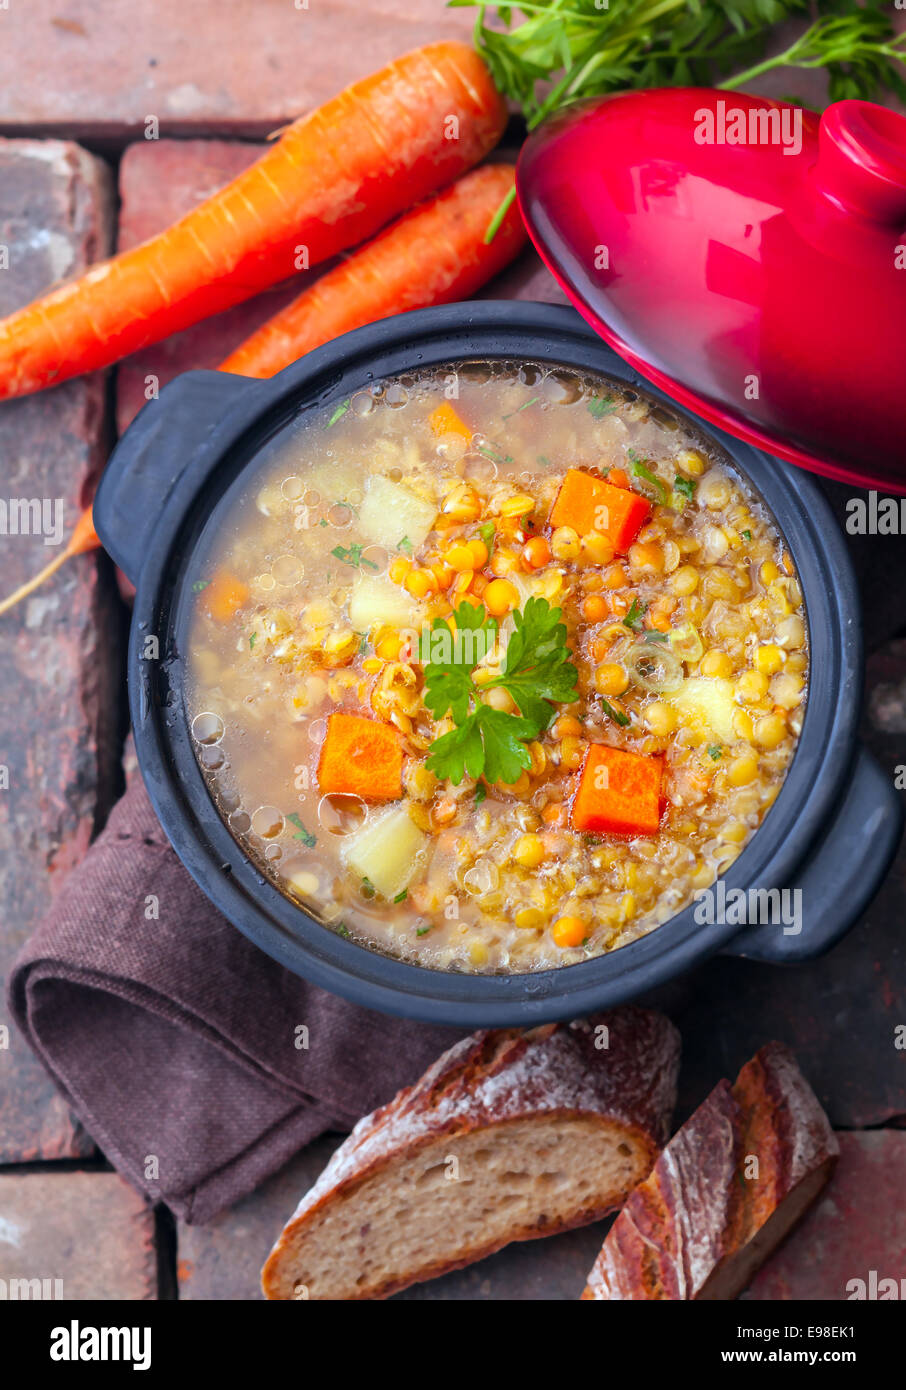 Overhead view of a thick wholesome vegetarian vegetable and lentil stew served with sliced bread on bricks Stock Photo